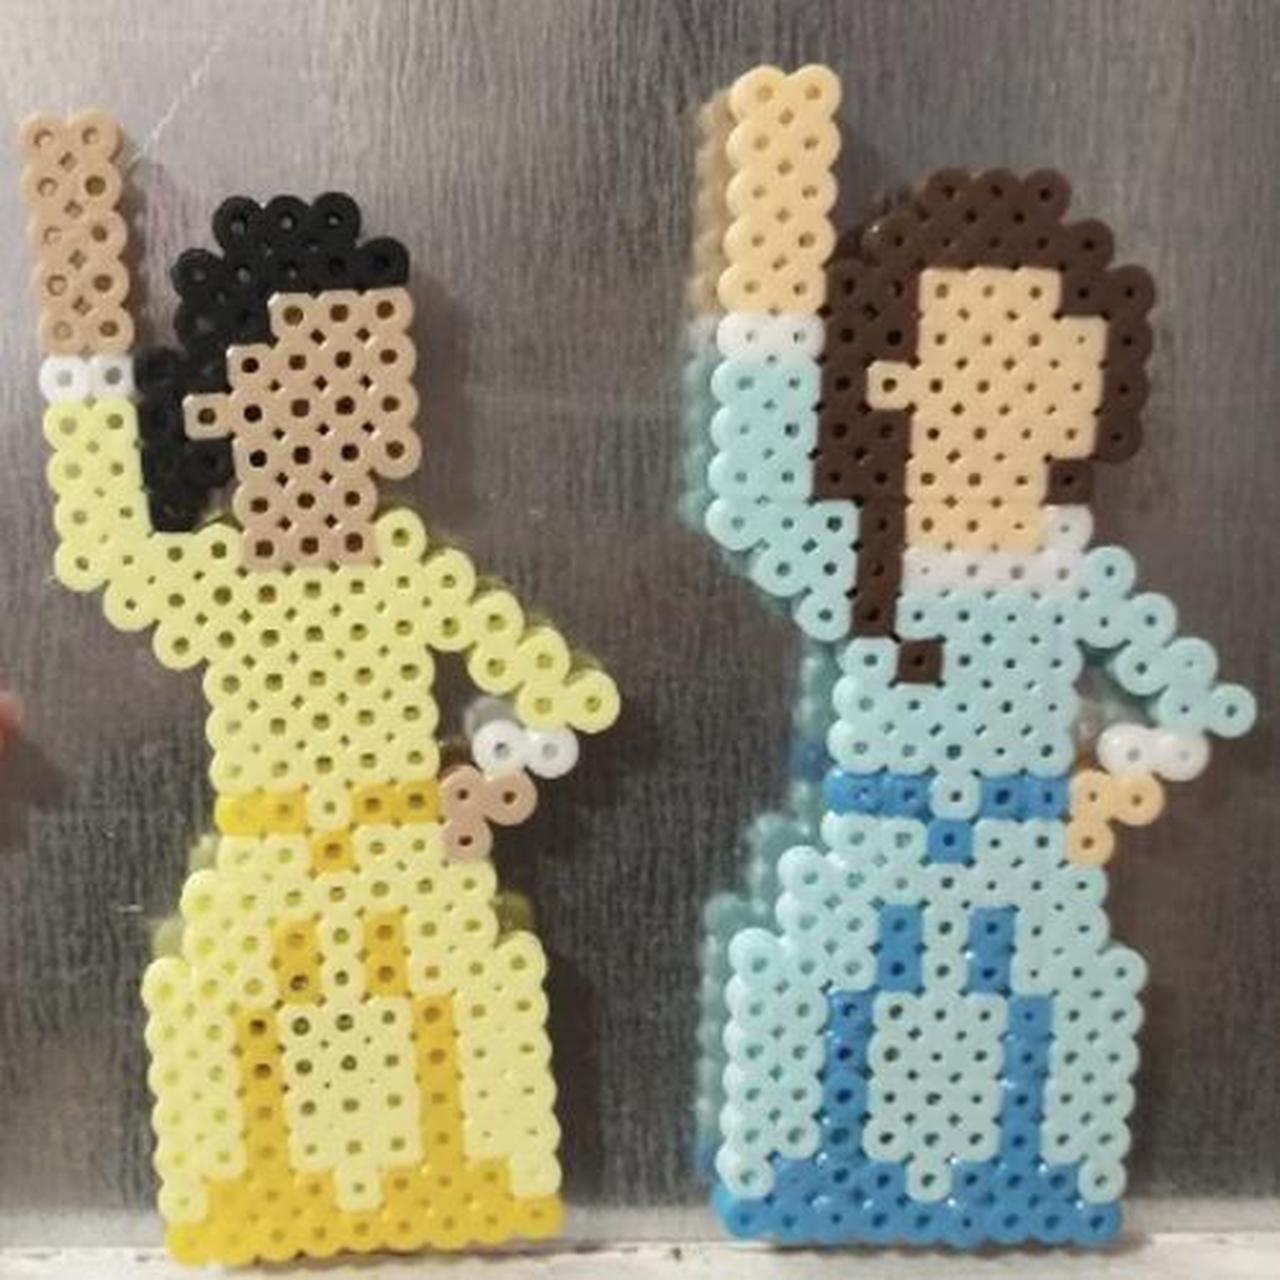 Product Image 3 - perler hamilton schuyler sisters magnets

this